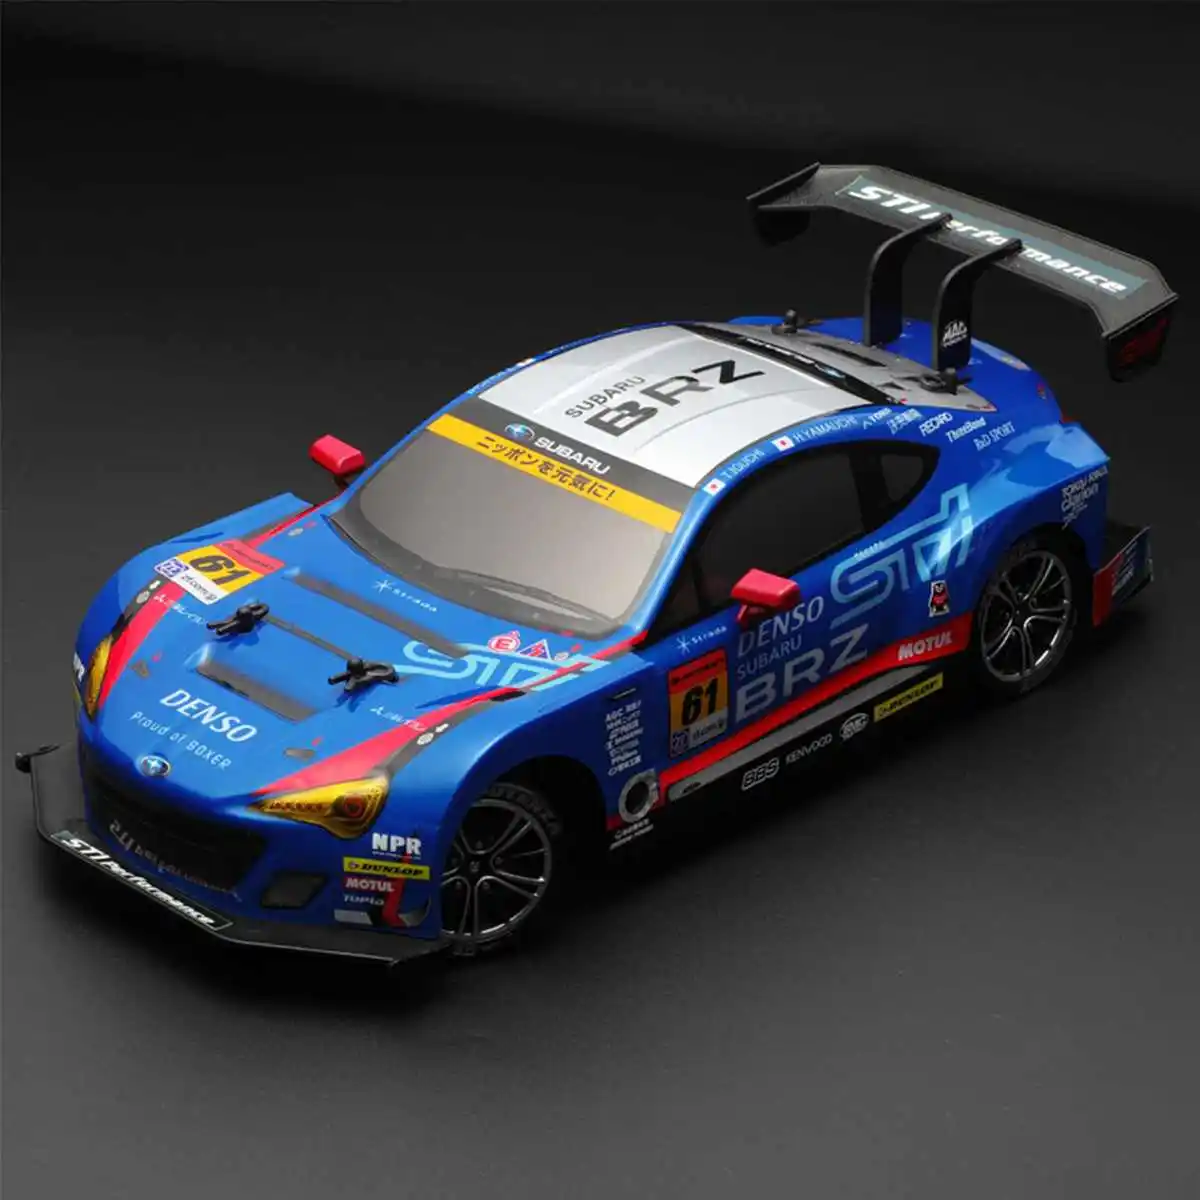 1:16 RC Car 4WD Drift Racing Car rally Championship 2.4G high speed Radio Remote Control BRZ RC Vehicle Electronic Hobby Toys enlarge